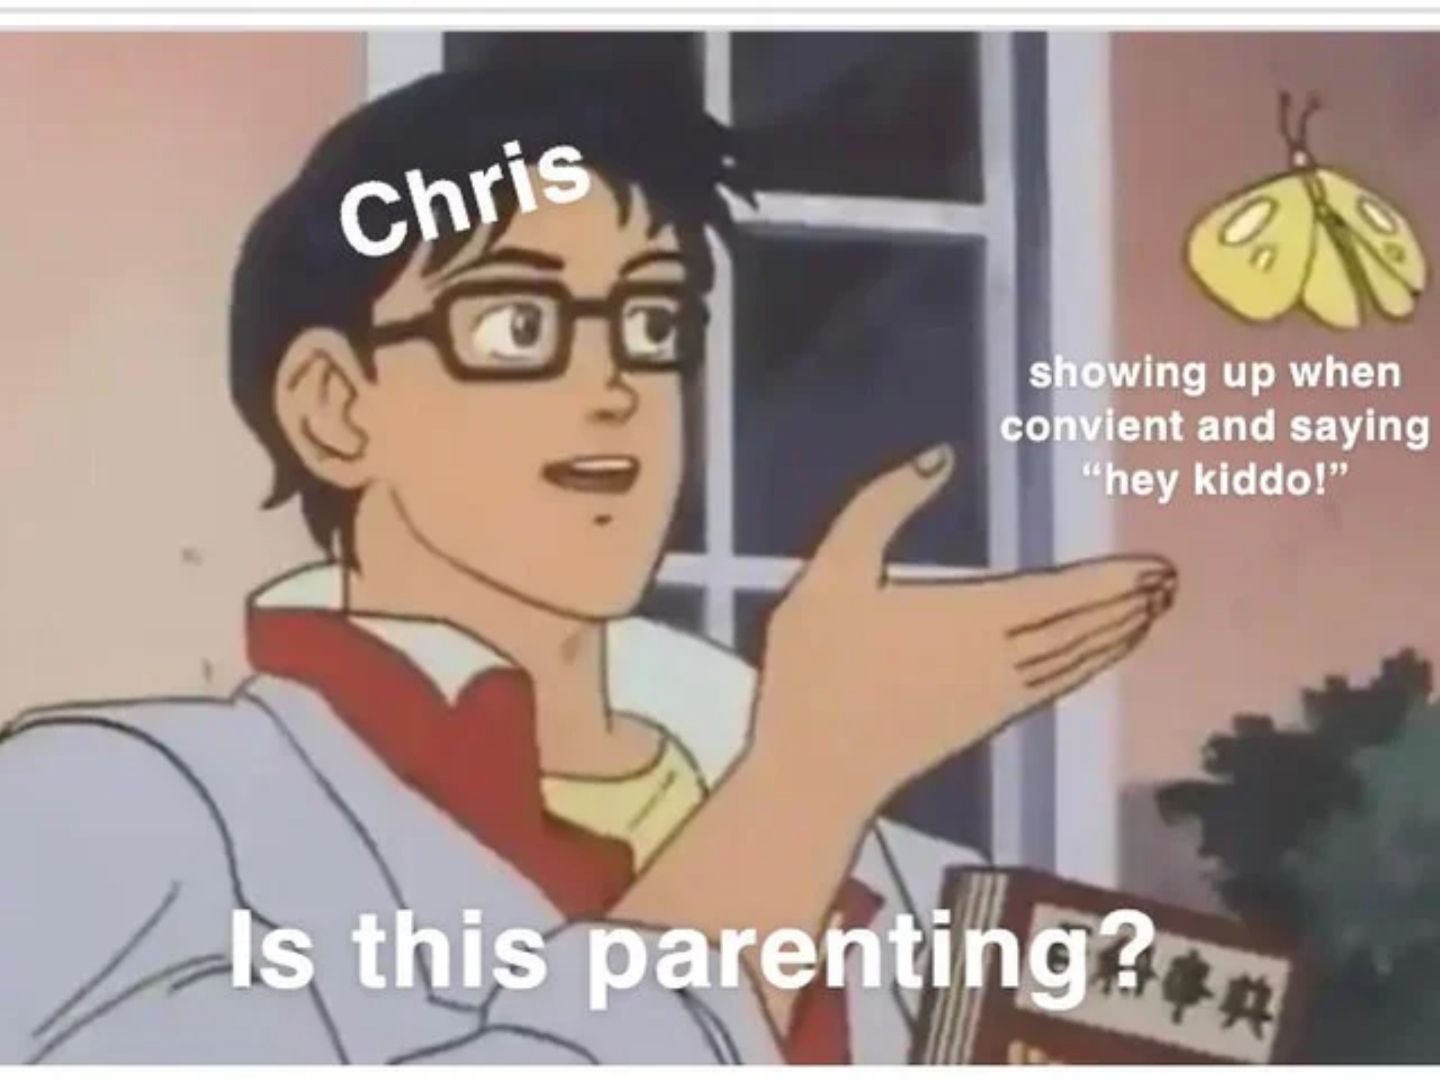 Meme about Chris as a dad in Gilmore Girls.